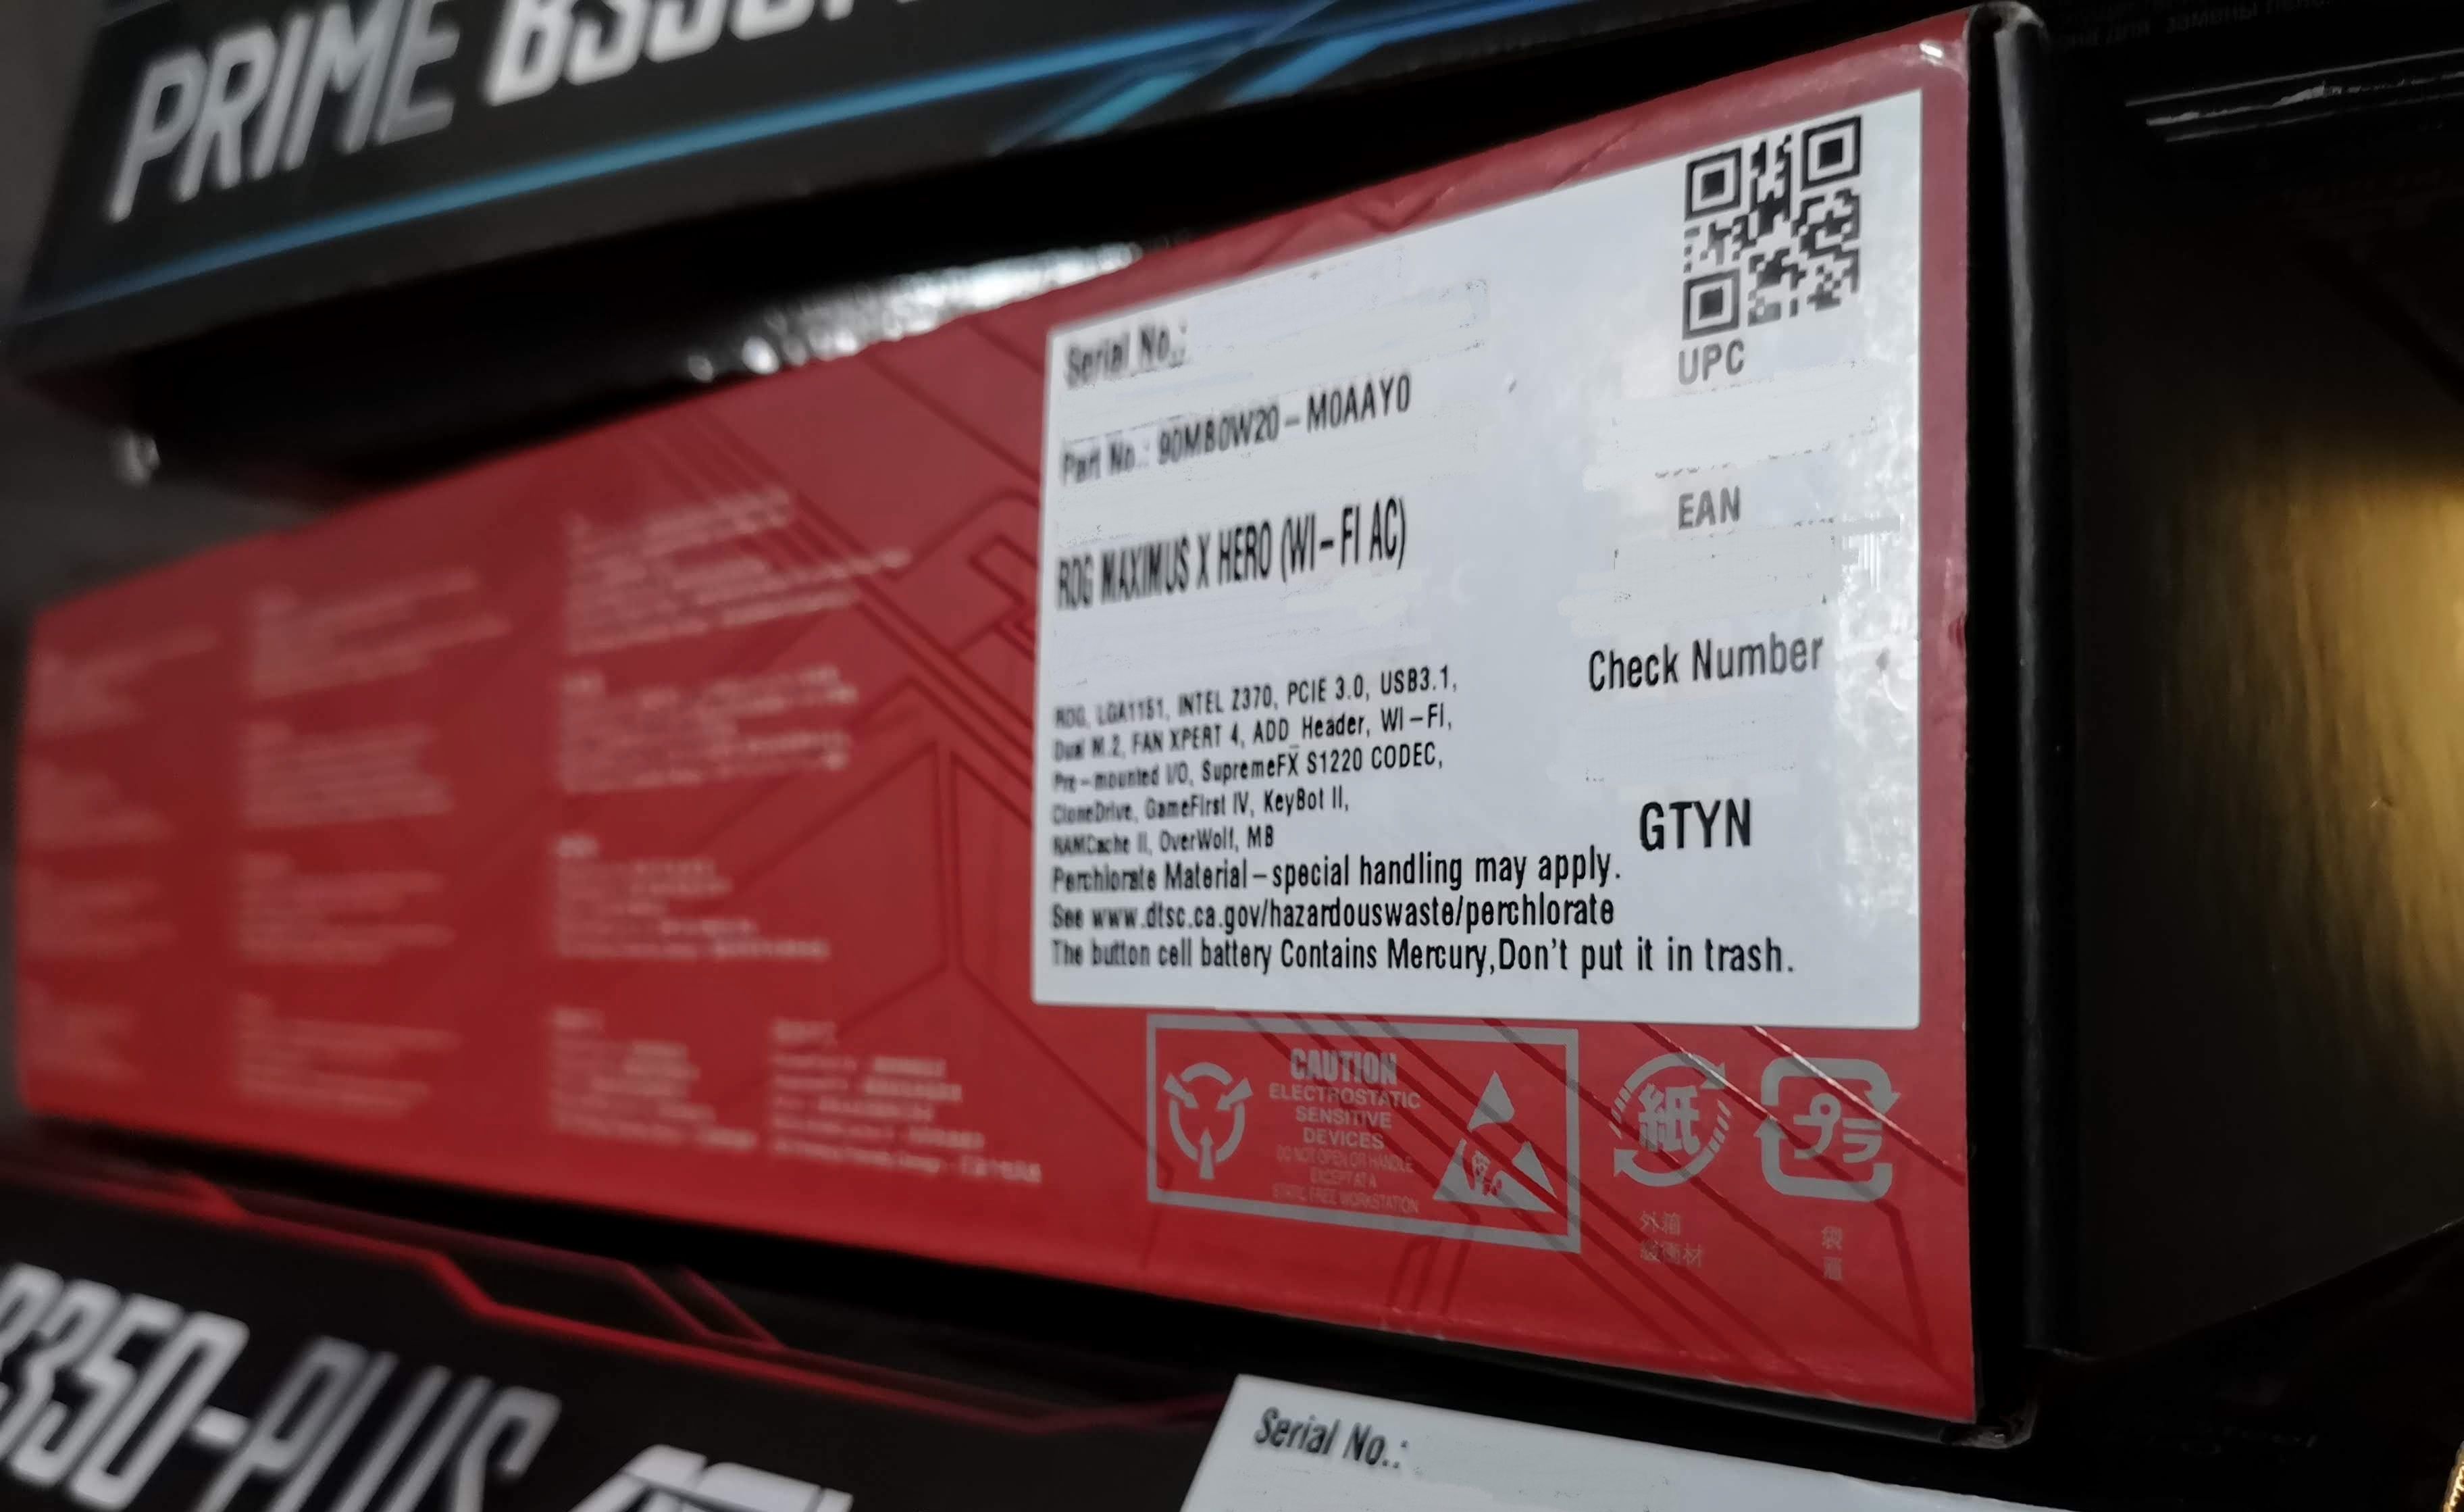 motherboard box information label with model